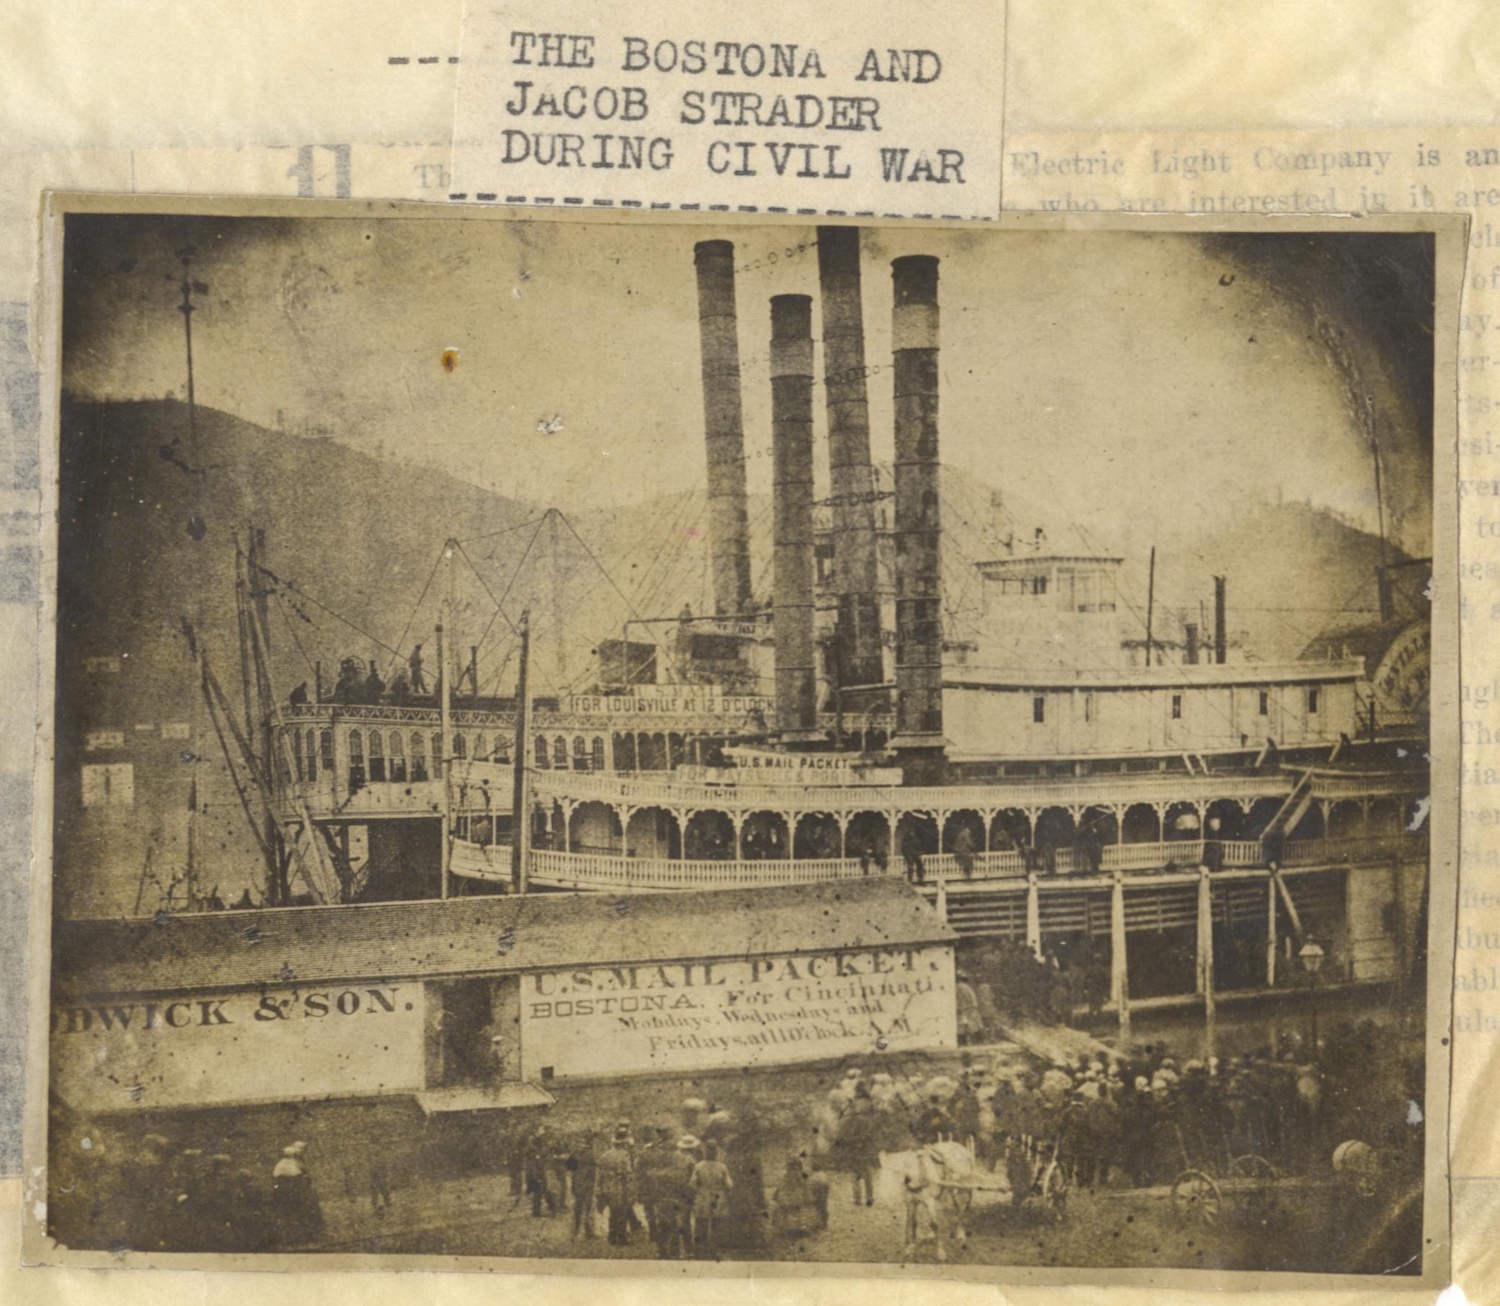 The Steamer Bostona, tied up at Portsmouth, Ohio, during the Civil War